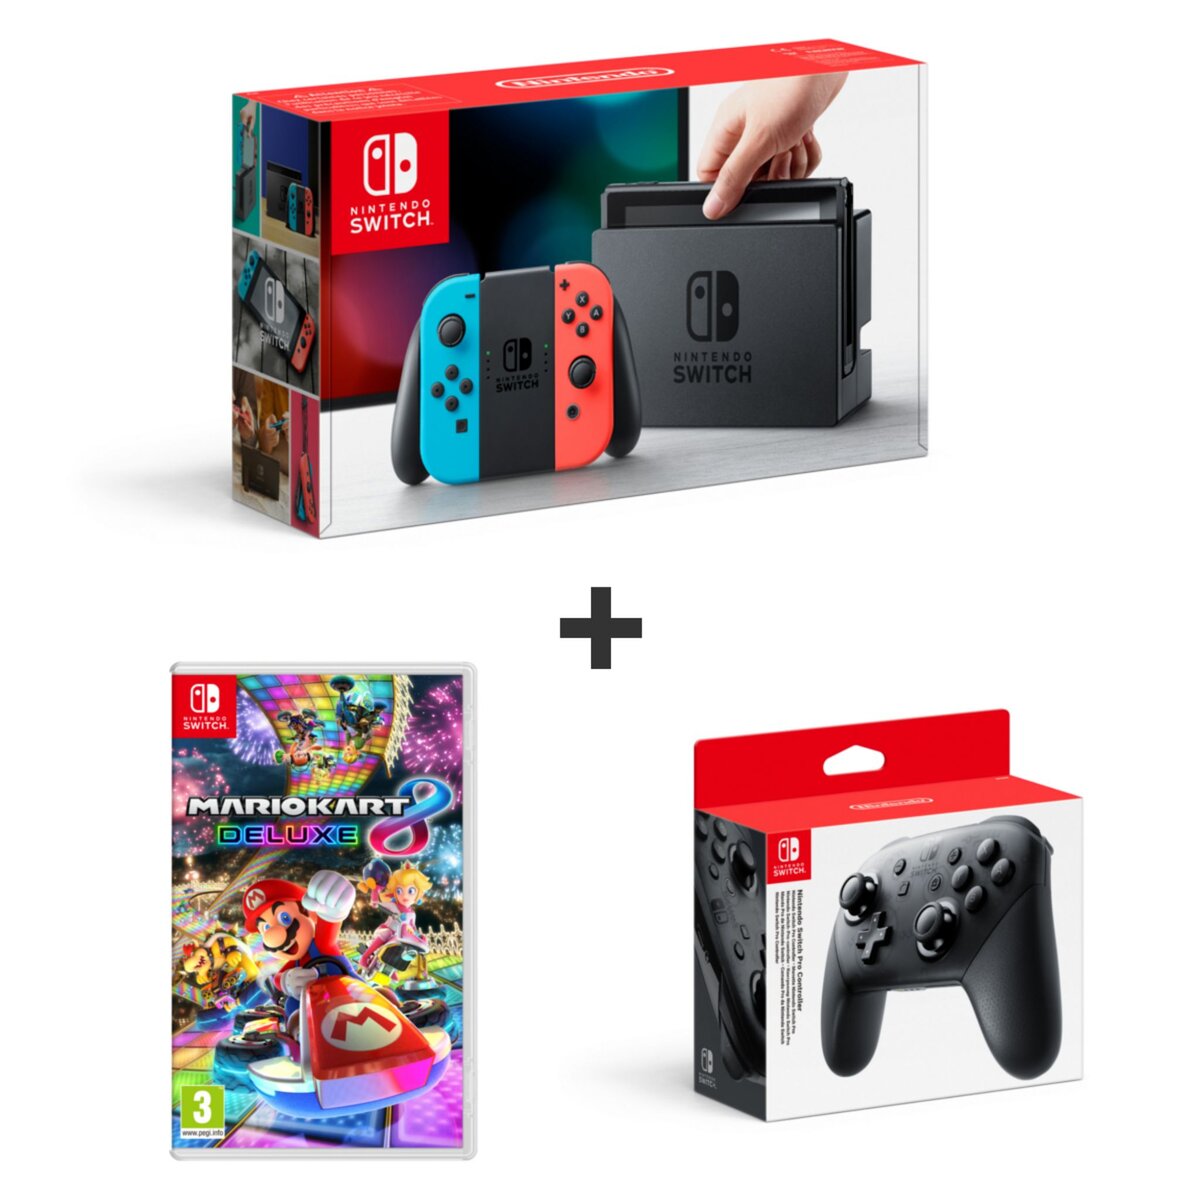 EXCLU WEB Console Nintendo Switch Néon + Mario Kart 8 Deluxe + Manette Switch PRO